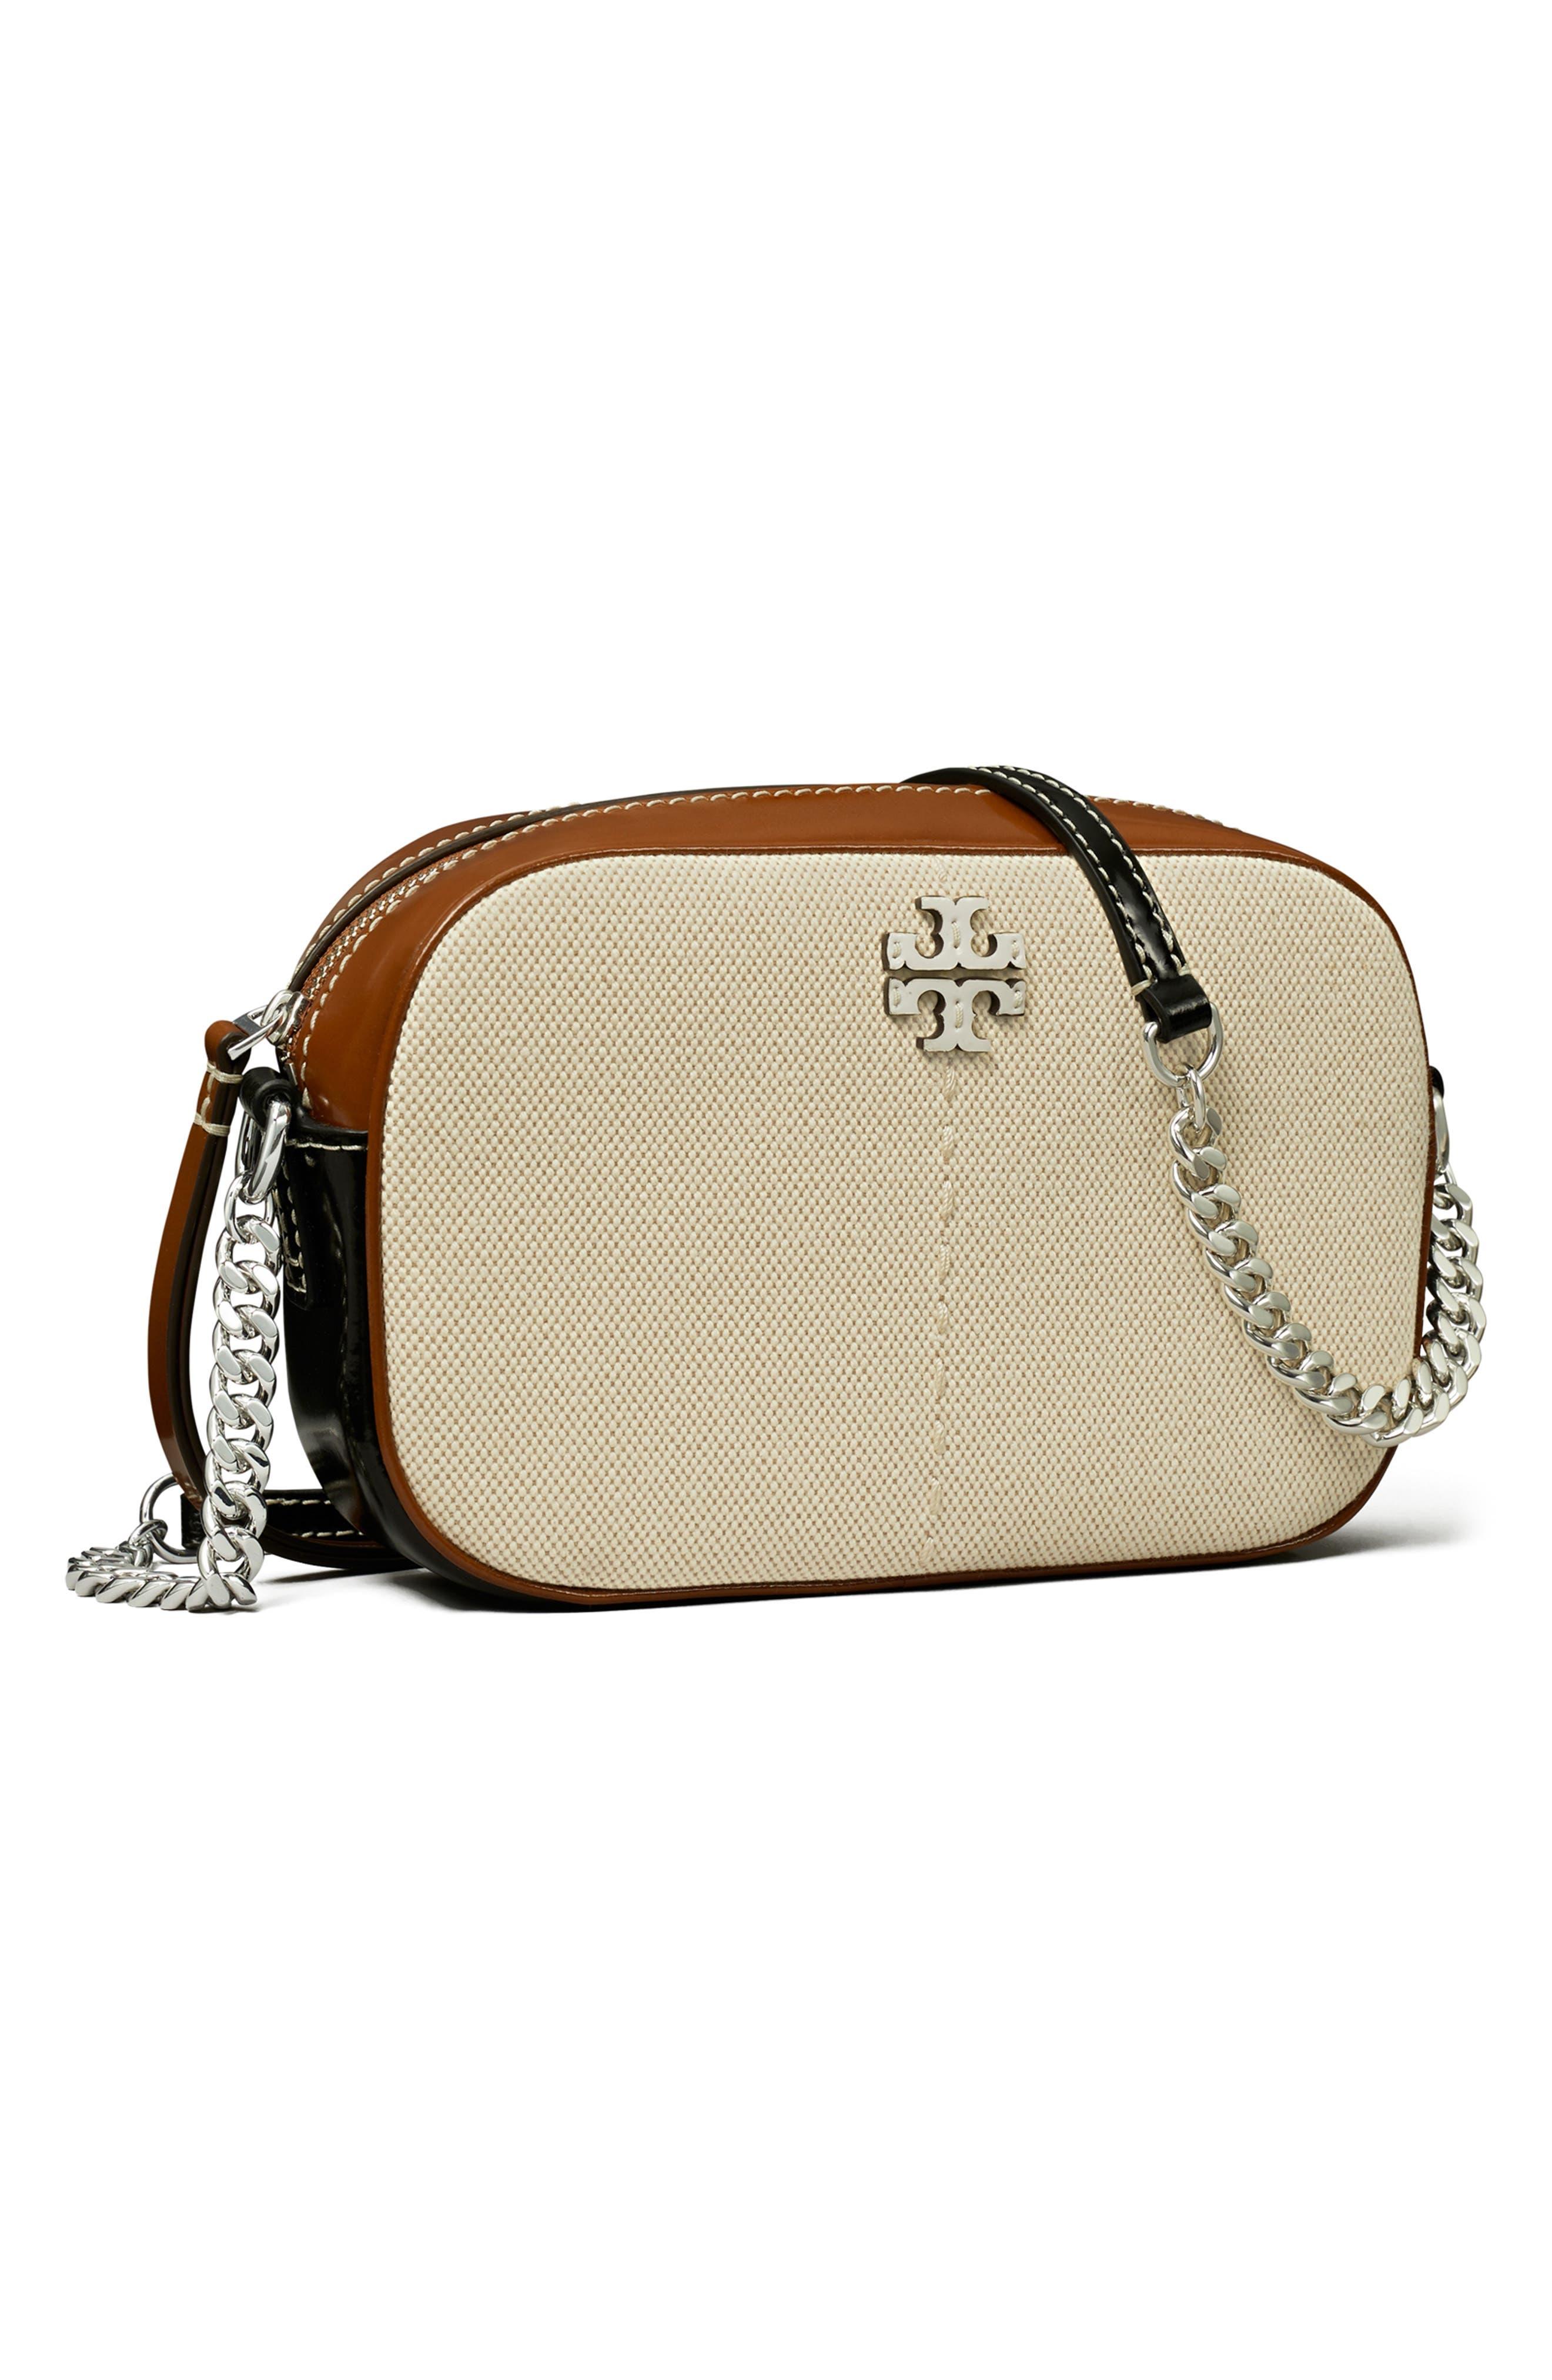 Tory Burch Mcgraw Canvas Camera Bag in Natural | Lyst